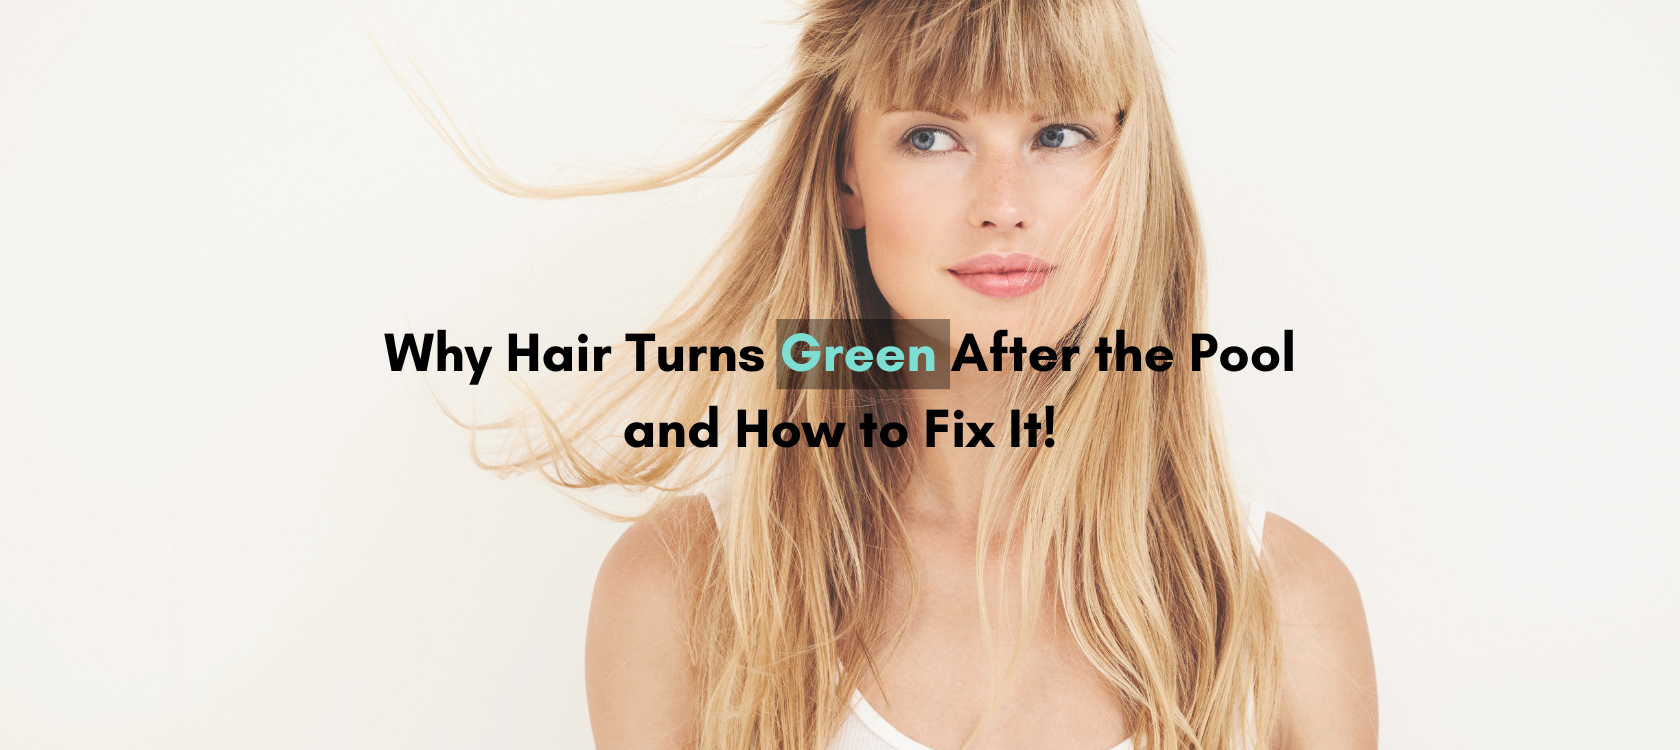 Why Hair Turns Green After the Pool and How to Fix It!